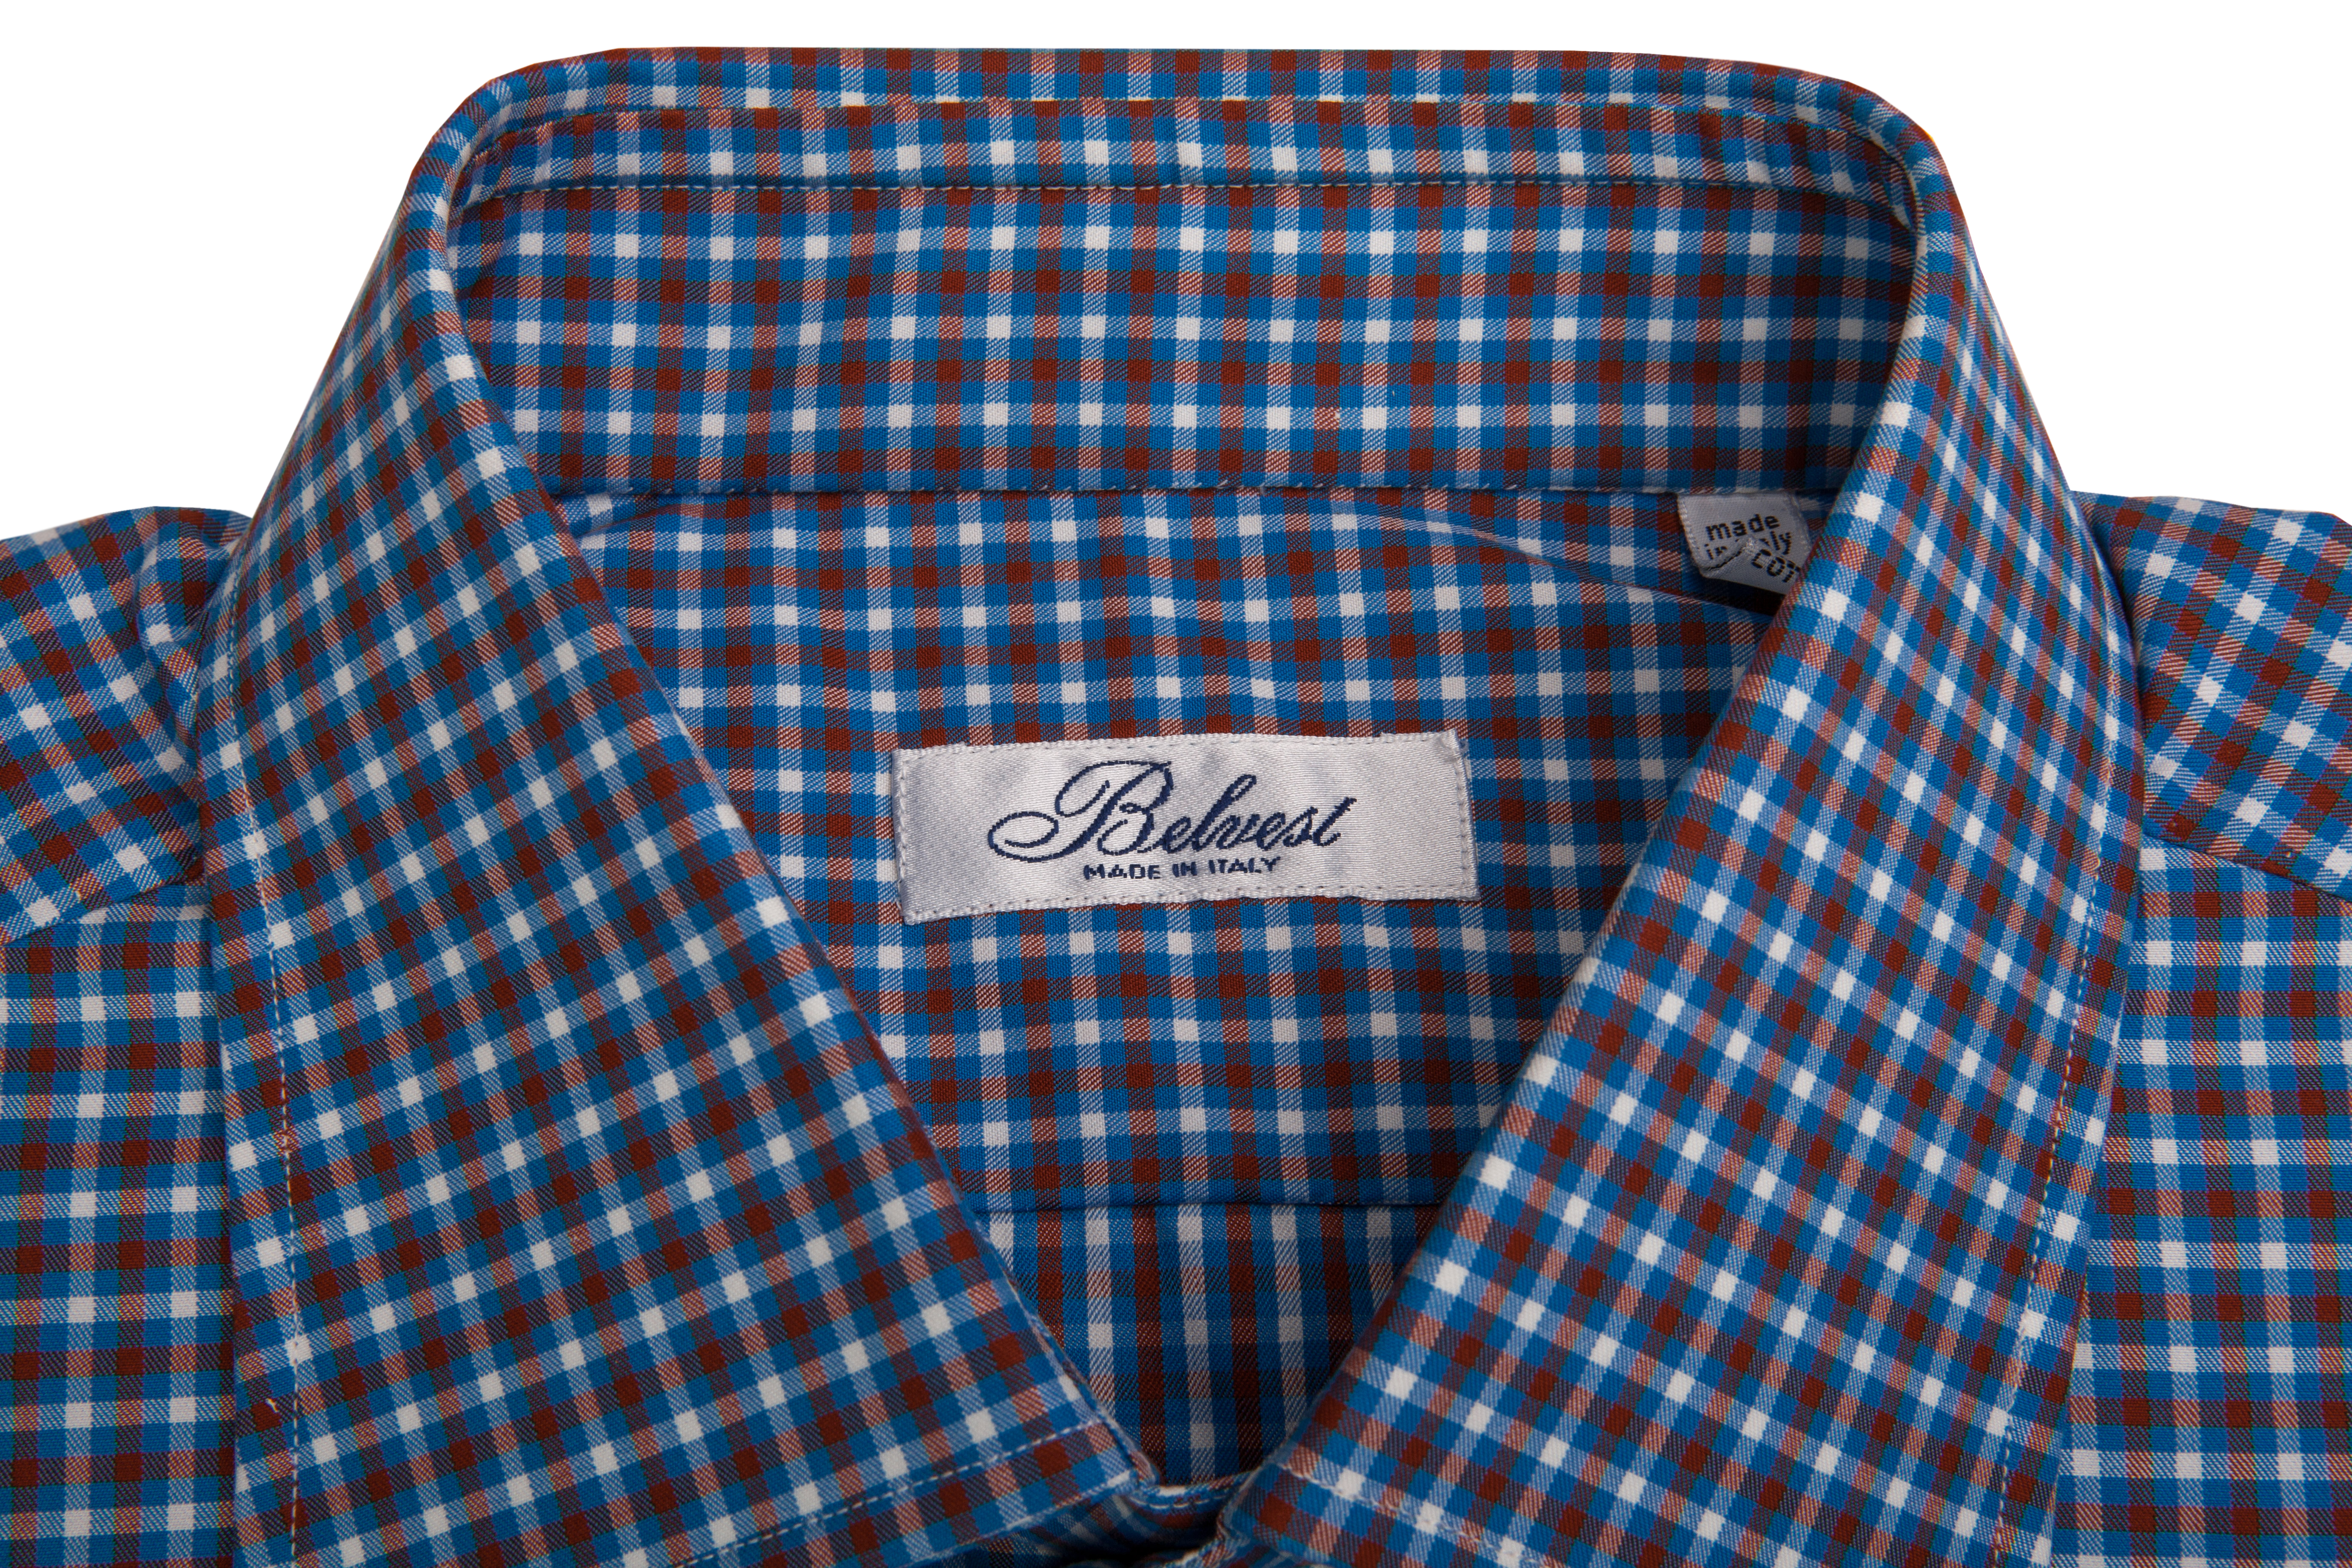 360$ BELVEST by FINAMORE Blue Green Check Shirt 7 Passages Hand-Sewn 15.5-39